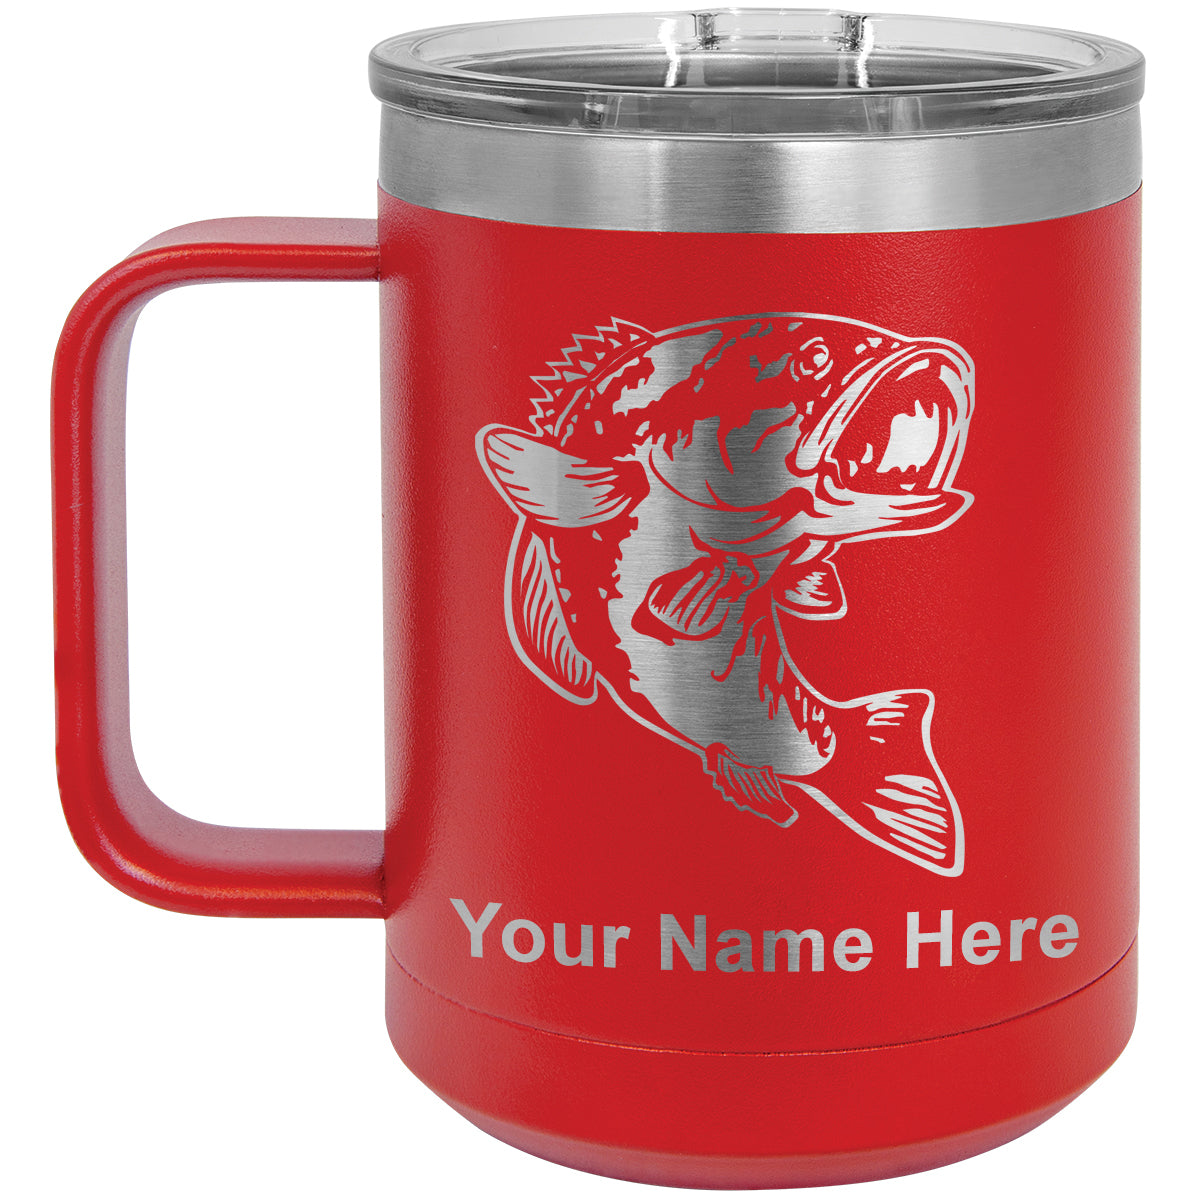 15oz Vacuum Insulated Coffee Mug, Bass Fish, Personalized Engraving Included